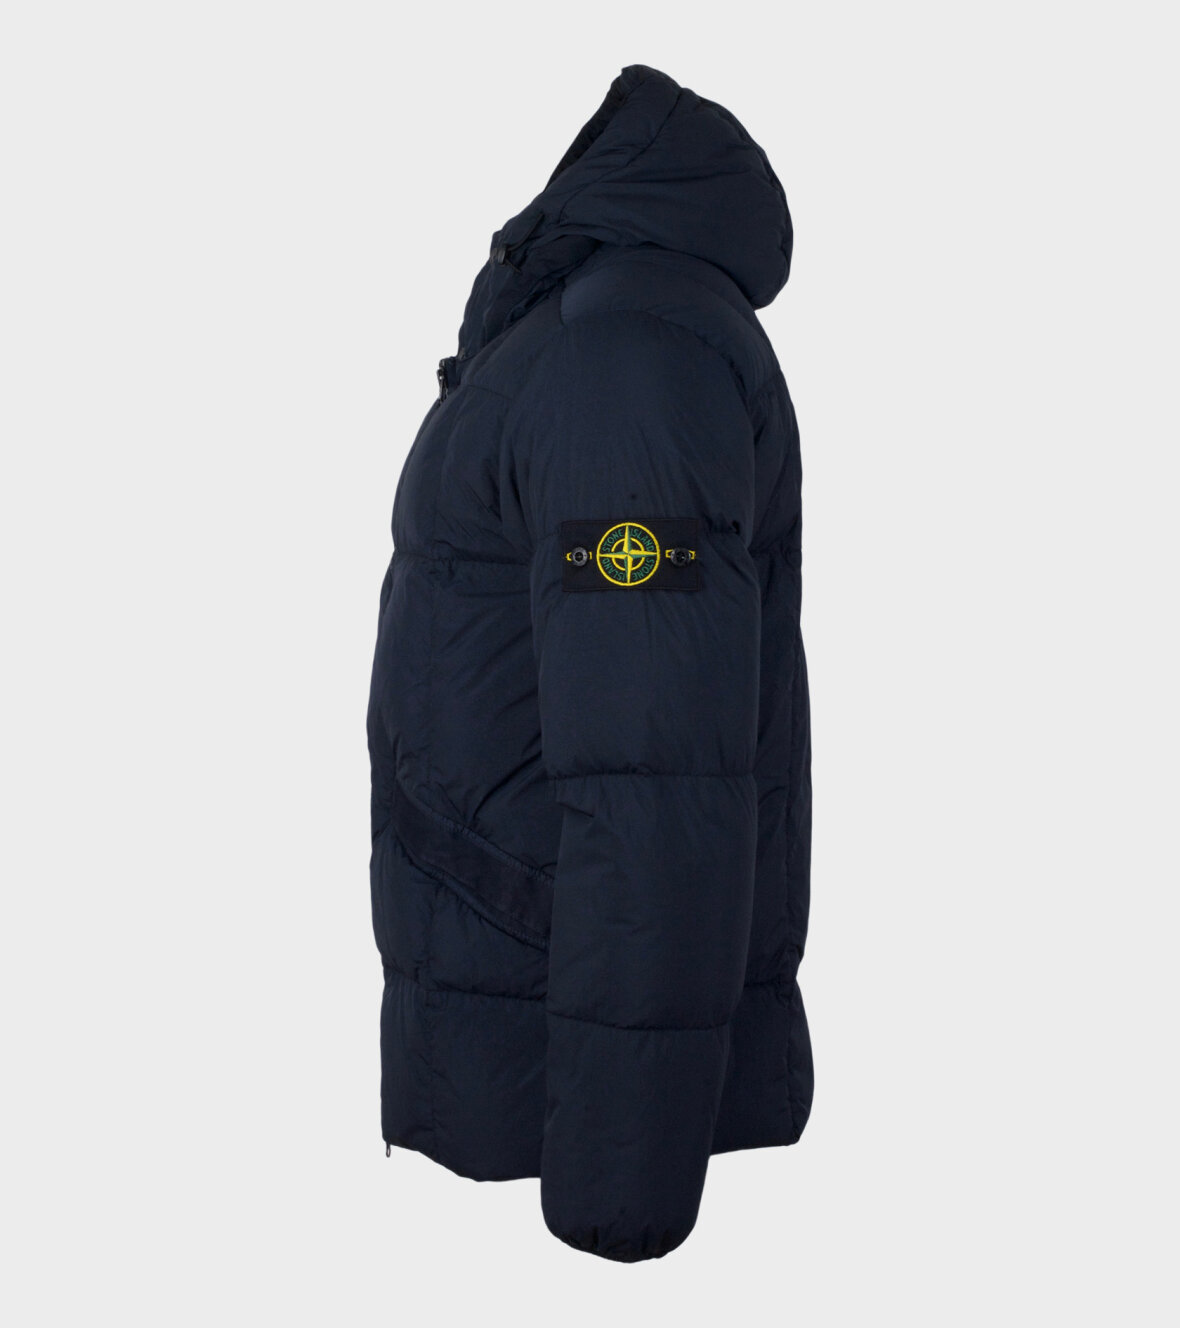 af periode Odds Stone Island Garment Dyed Jacket Navy - dr. Adams